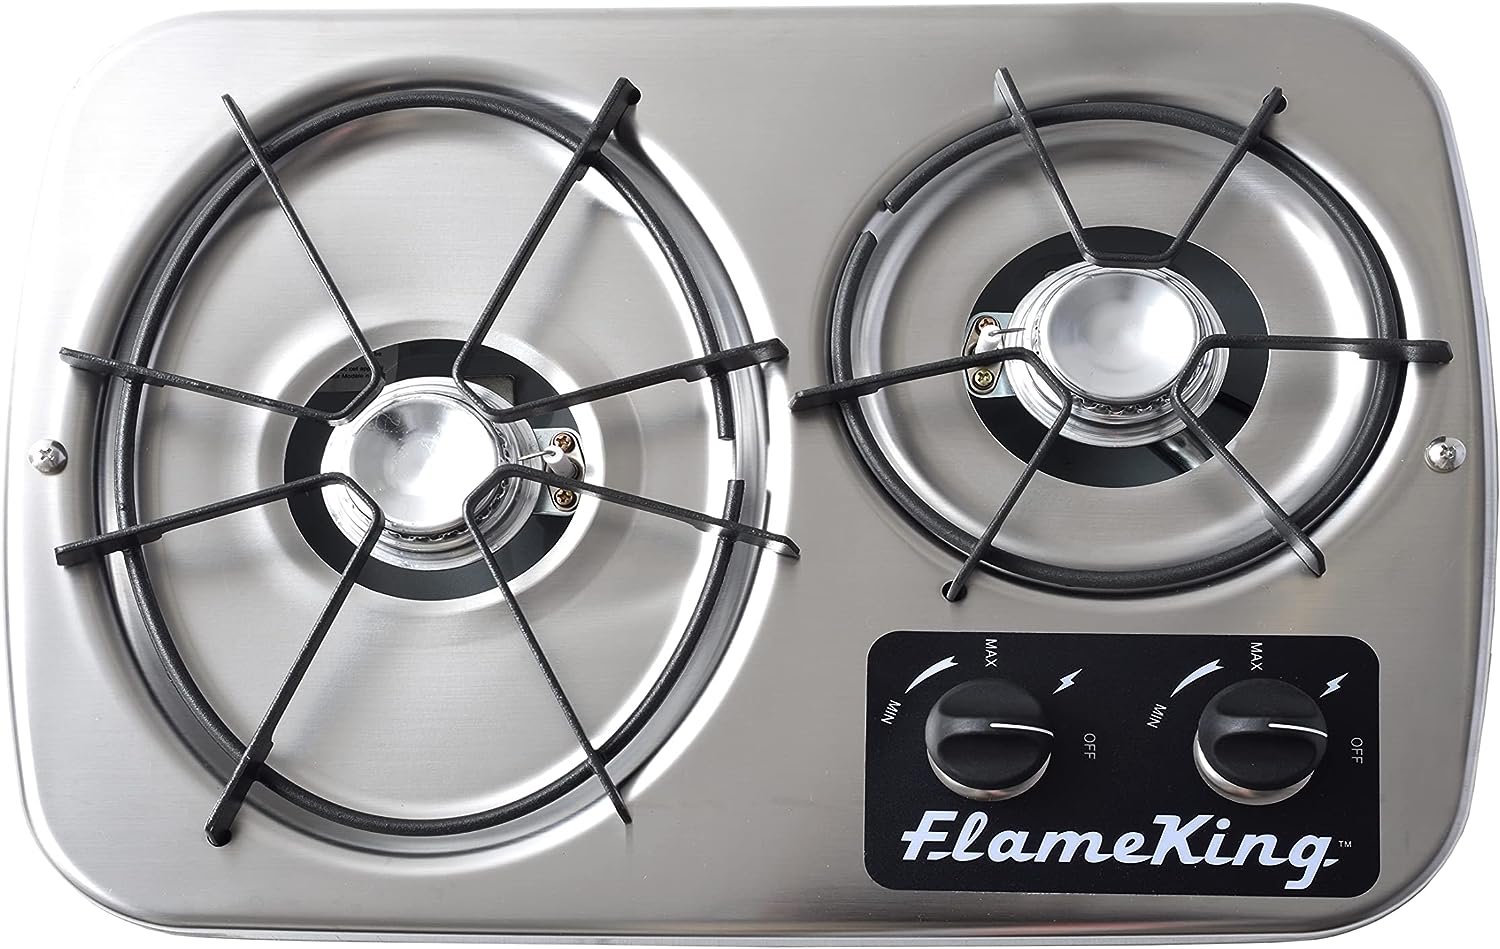 A stainless steel Flame King 2 Burner Built-In RV Trailer Stove with Wind Shield stove top with the word flame king on it.